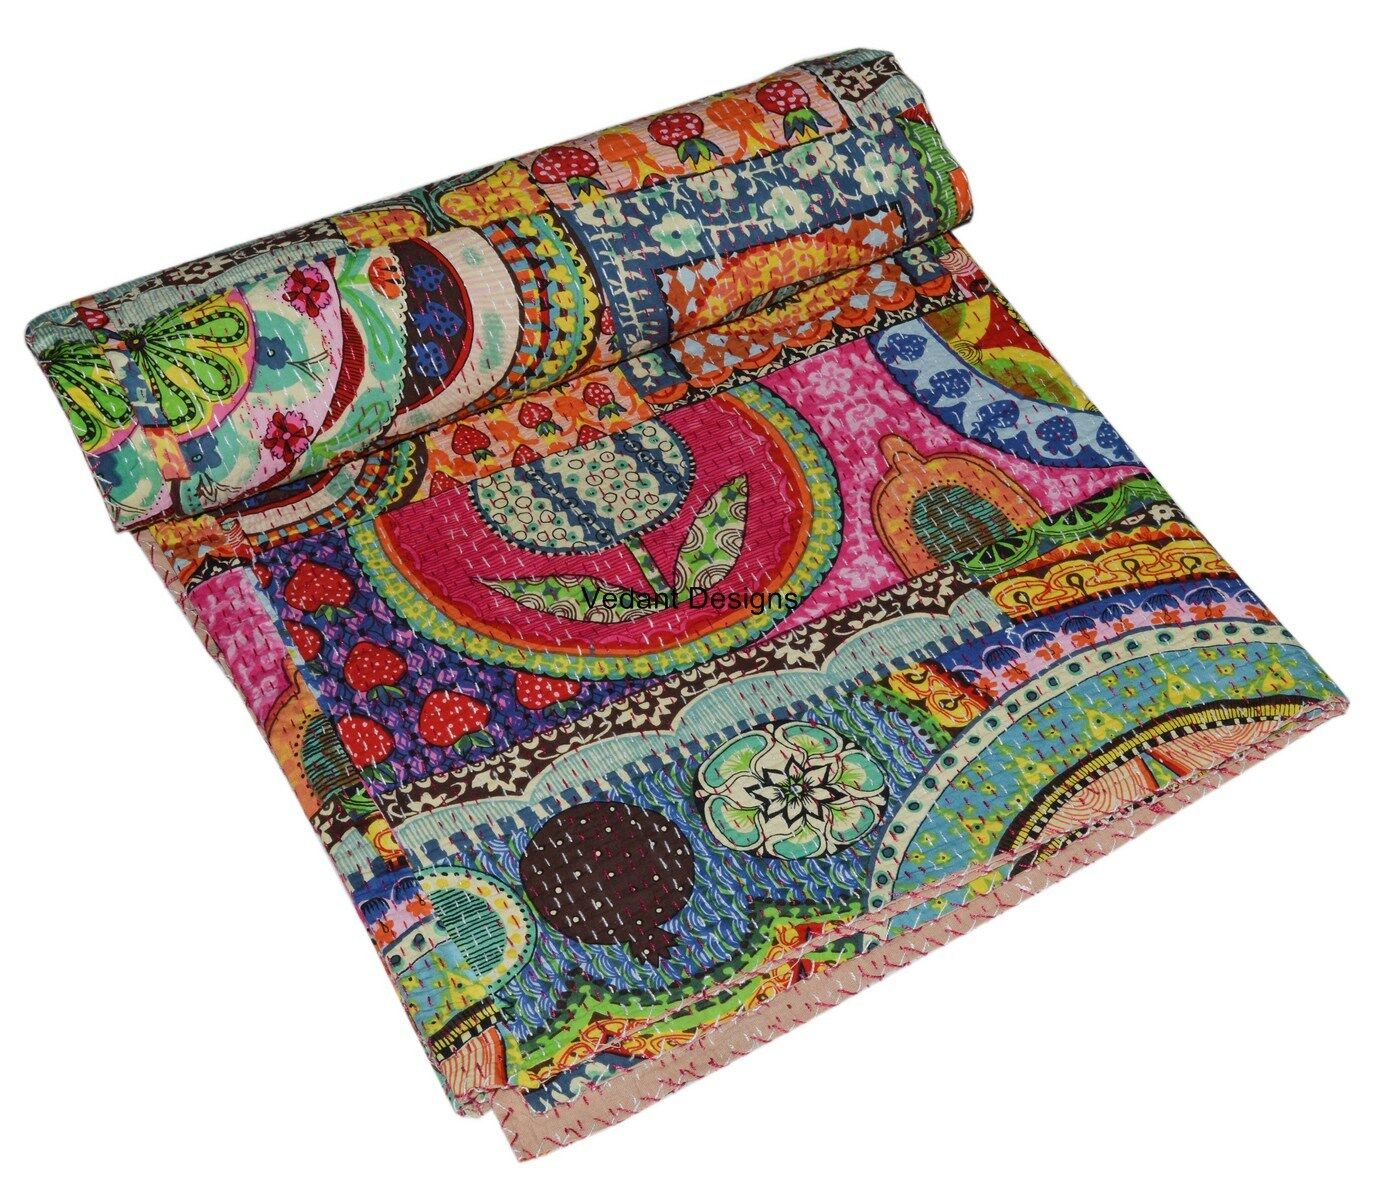 V Vedant Designs Indian Handmade Queen Cotton Twin Kantha Quilt Throw Blanket Bedsread 90x60 Inch